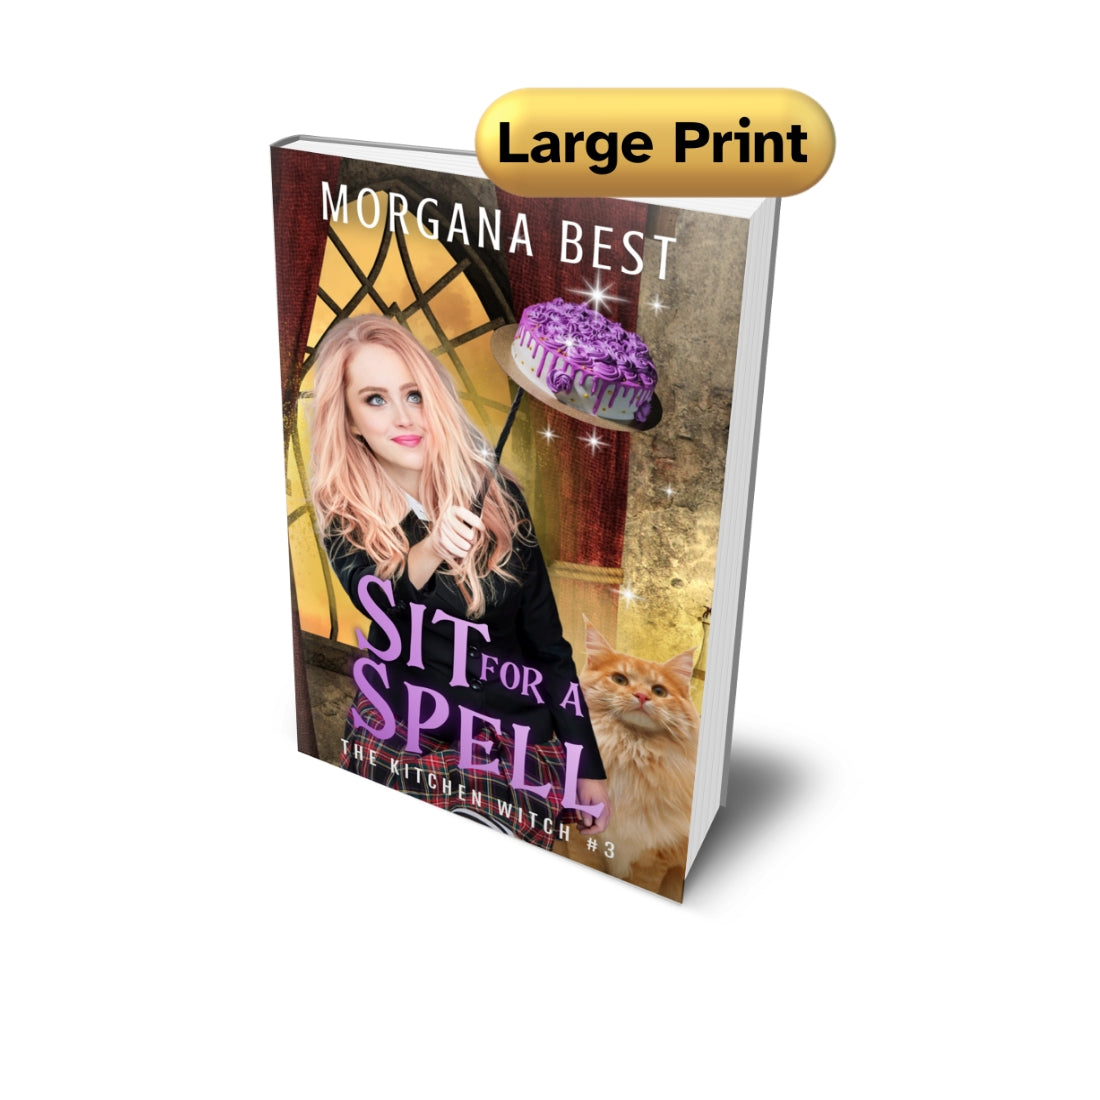 Sit for a Spell Large Print cozy mystery paperback book